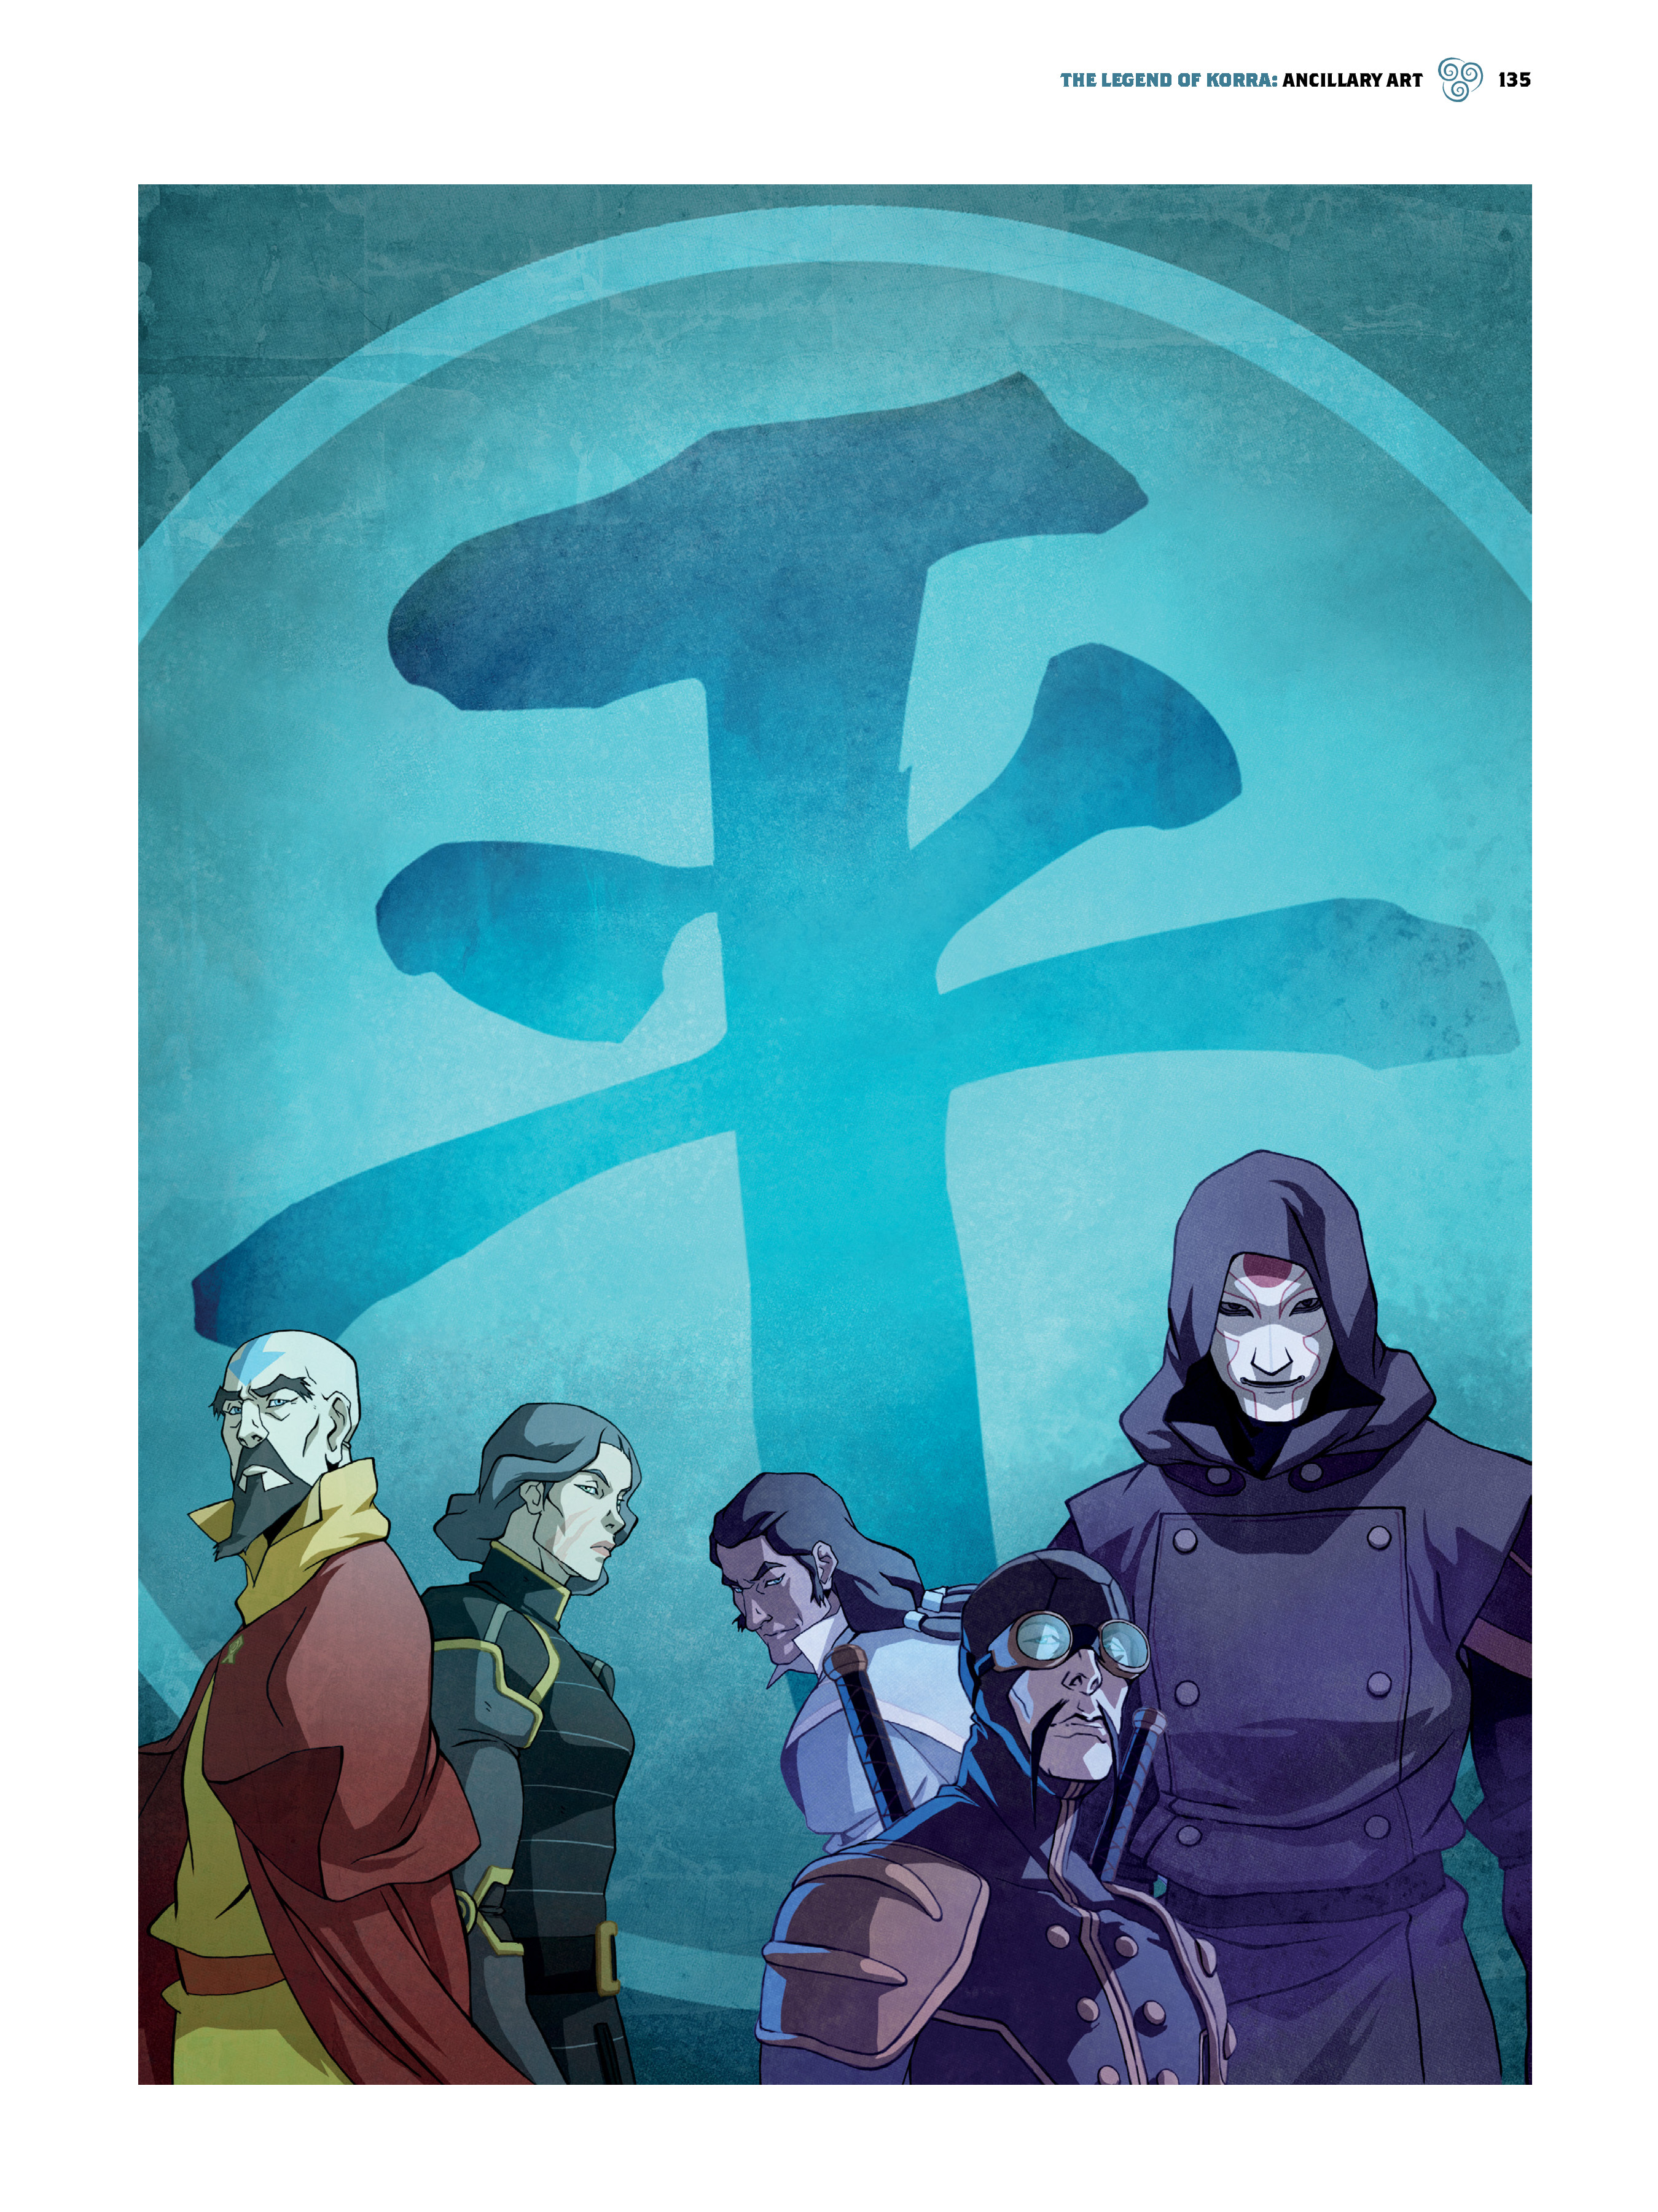 Read online The Legend of Korra: The Art of the Animated Series comic -  Issue # TPB 1 - 120